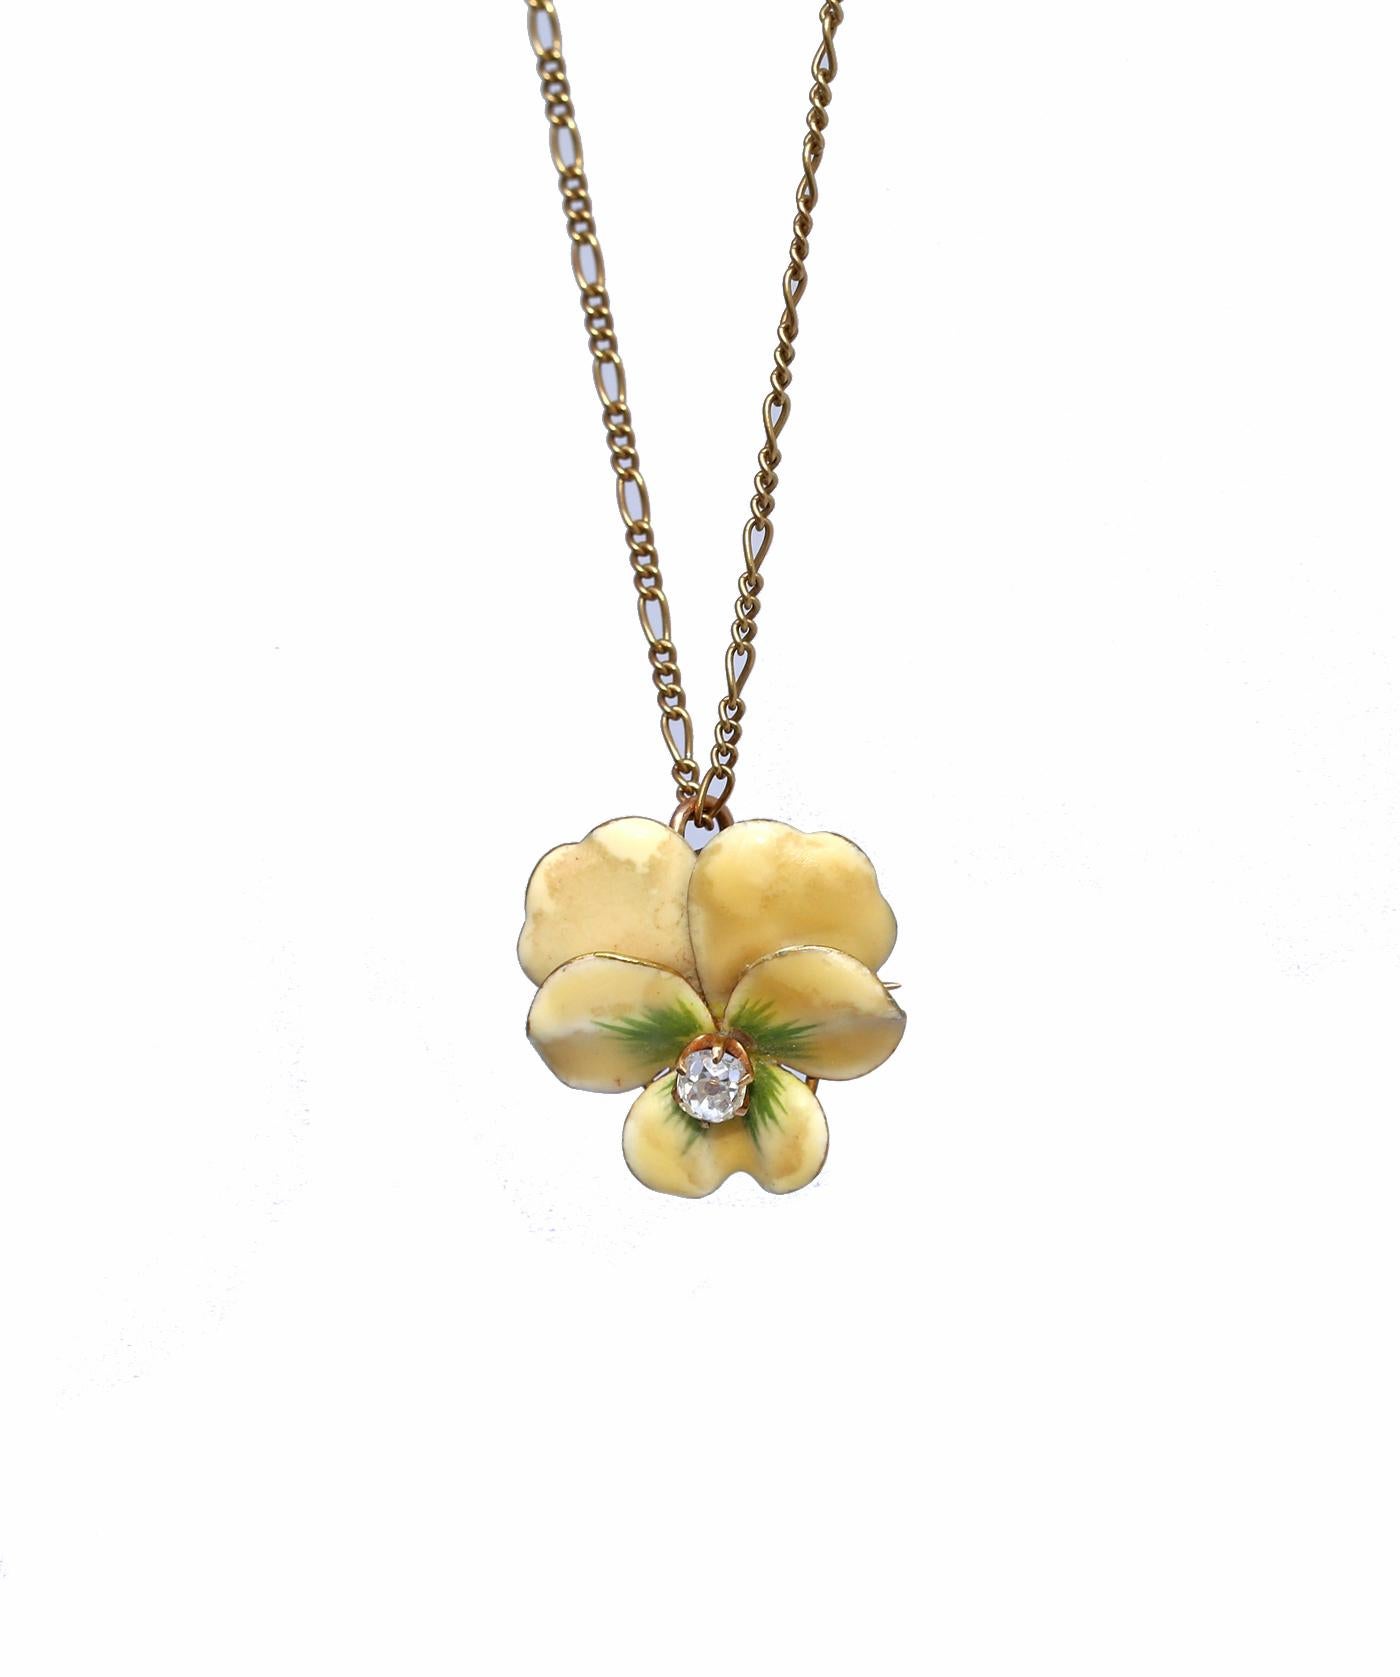 Art Nouveau Pansy Flower Diamond Enamel Brooch or a Pendant on a Chain. So delicate and so natural looking that it is an amazing work of jewelry art. The petals have colour grading from off-white to green, just like the real flower. With a Diamond